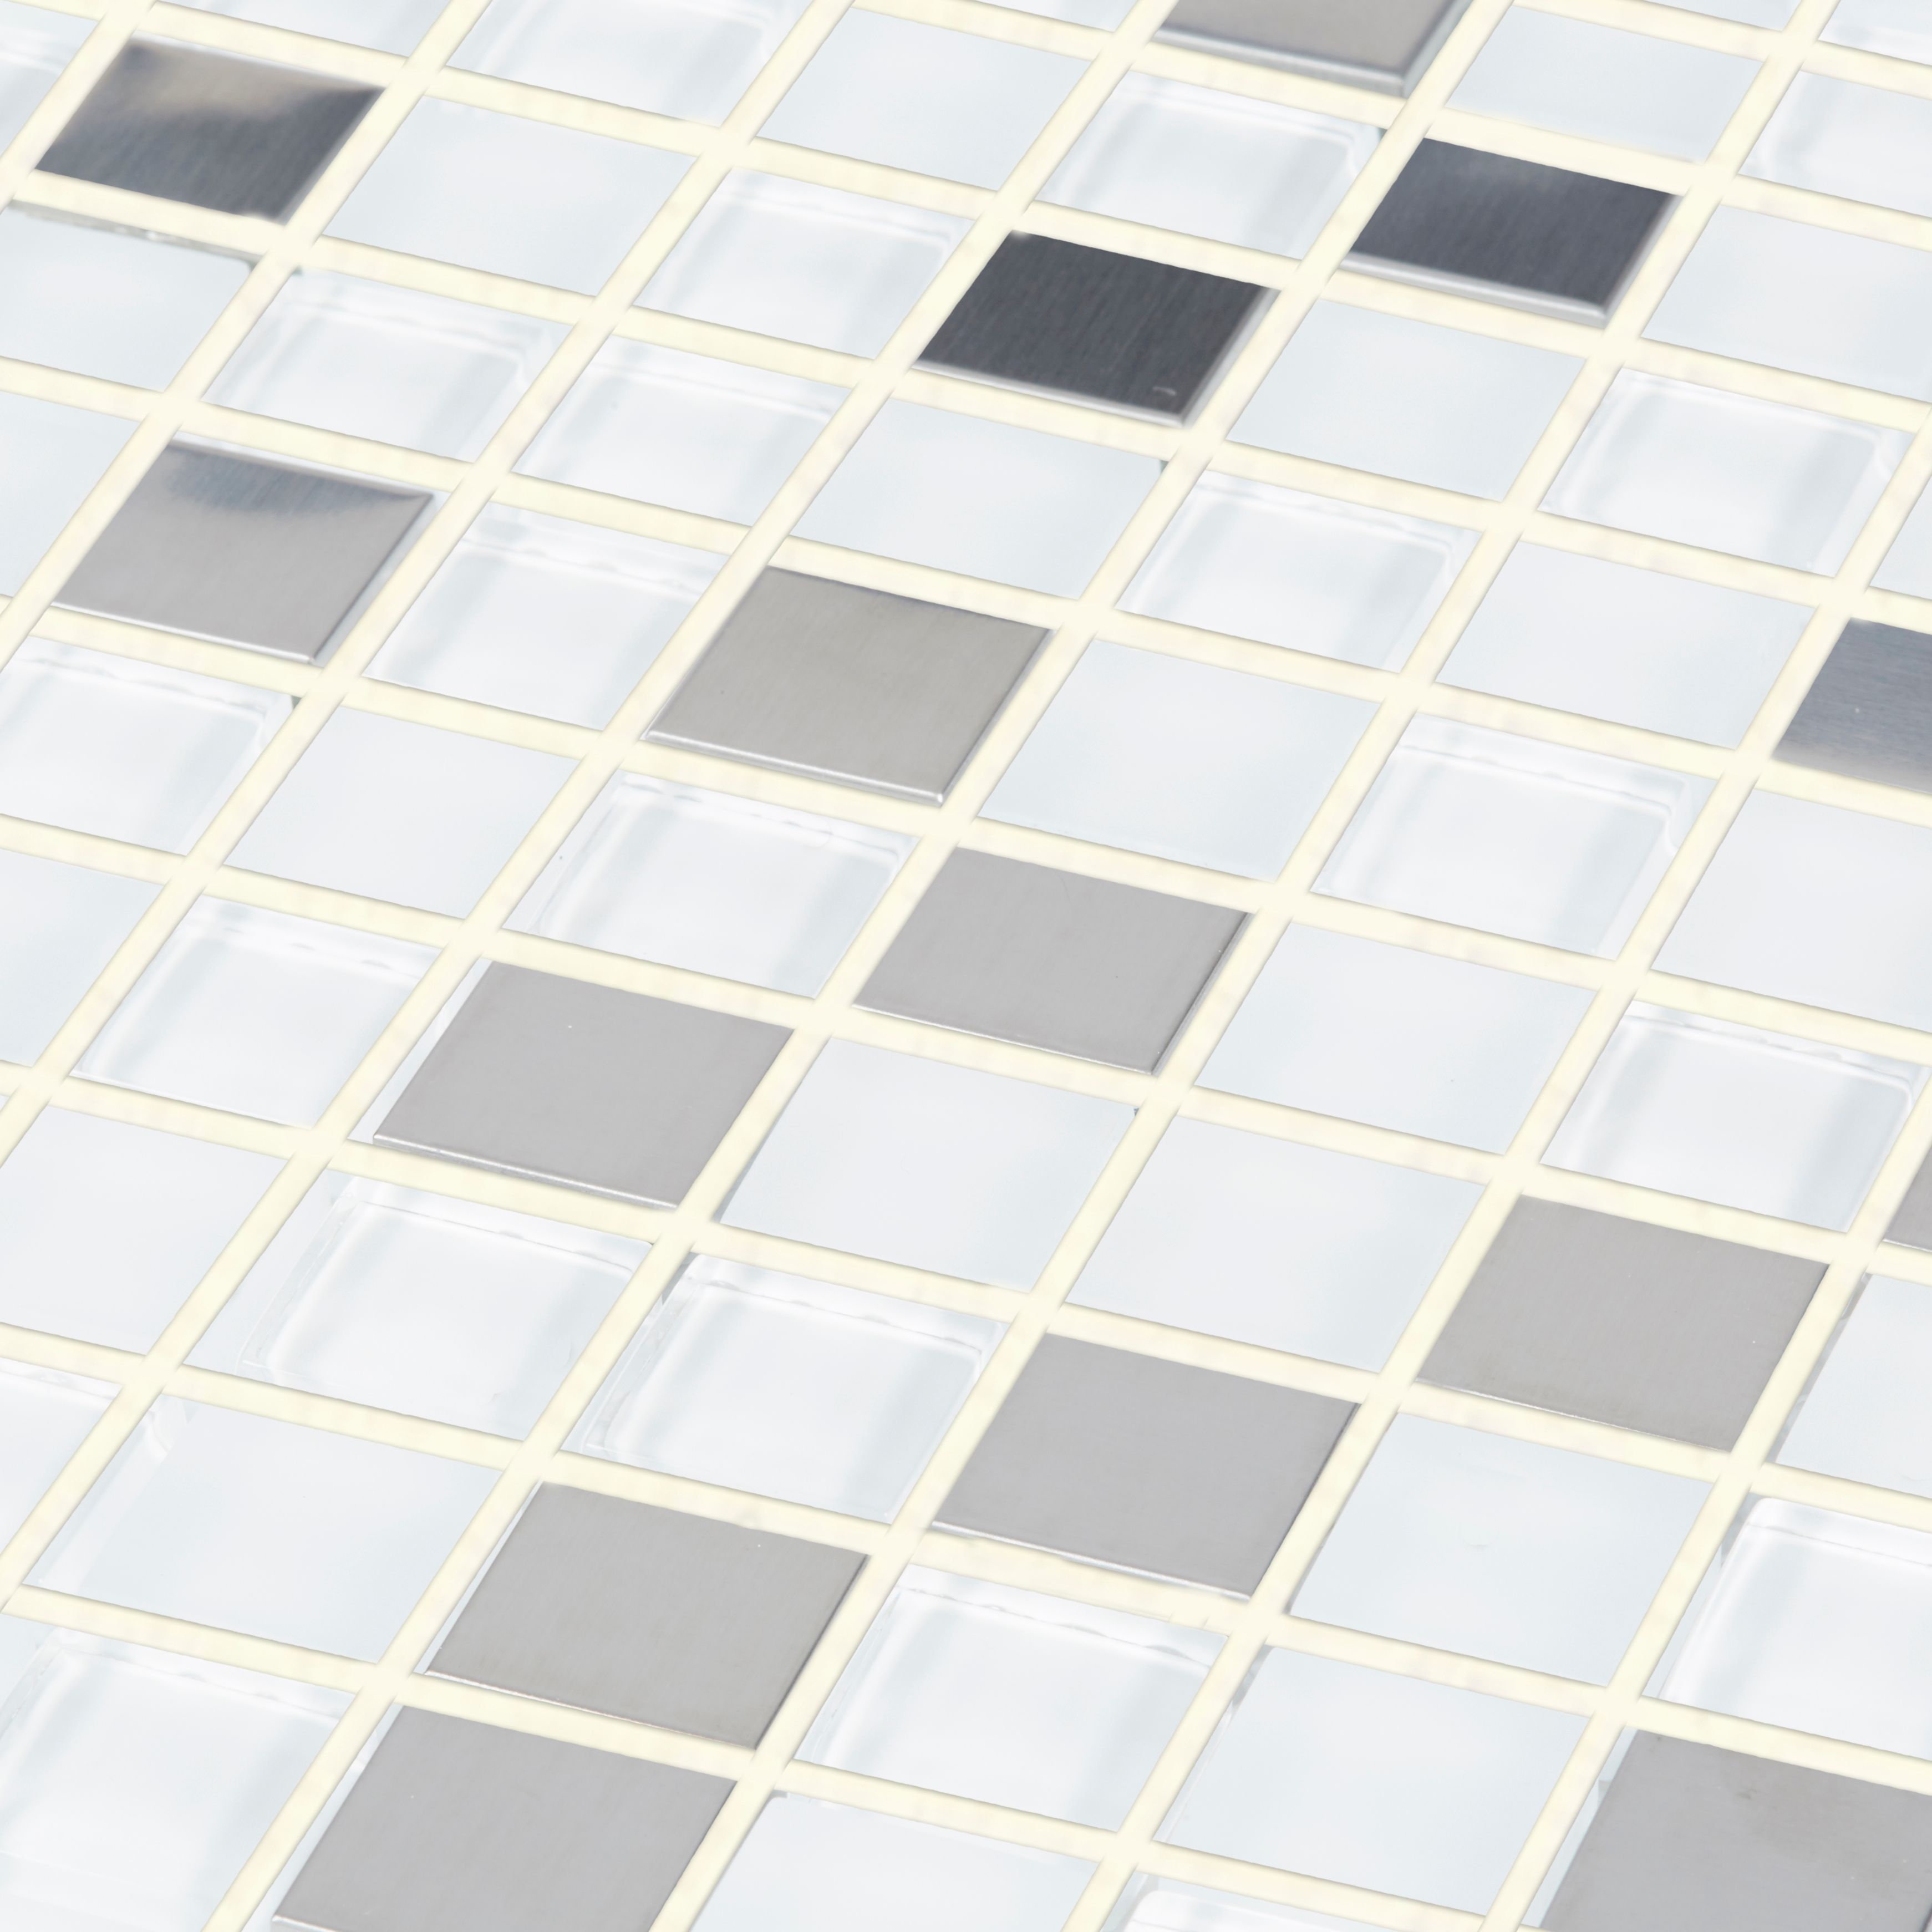 Prate Grey White Frosted Gloss Mosaic Glass Stainless Steel Mosaic Tile L 320mm W 32mm~3663602994367 02bq?$MOB PREV$&$width=768&$height=768